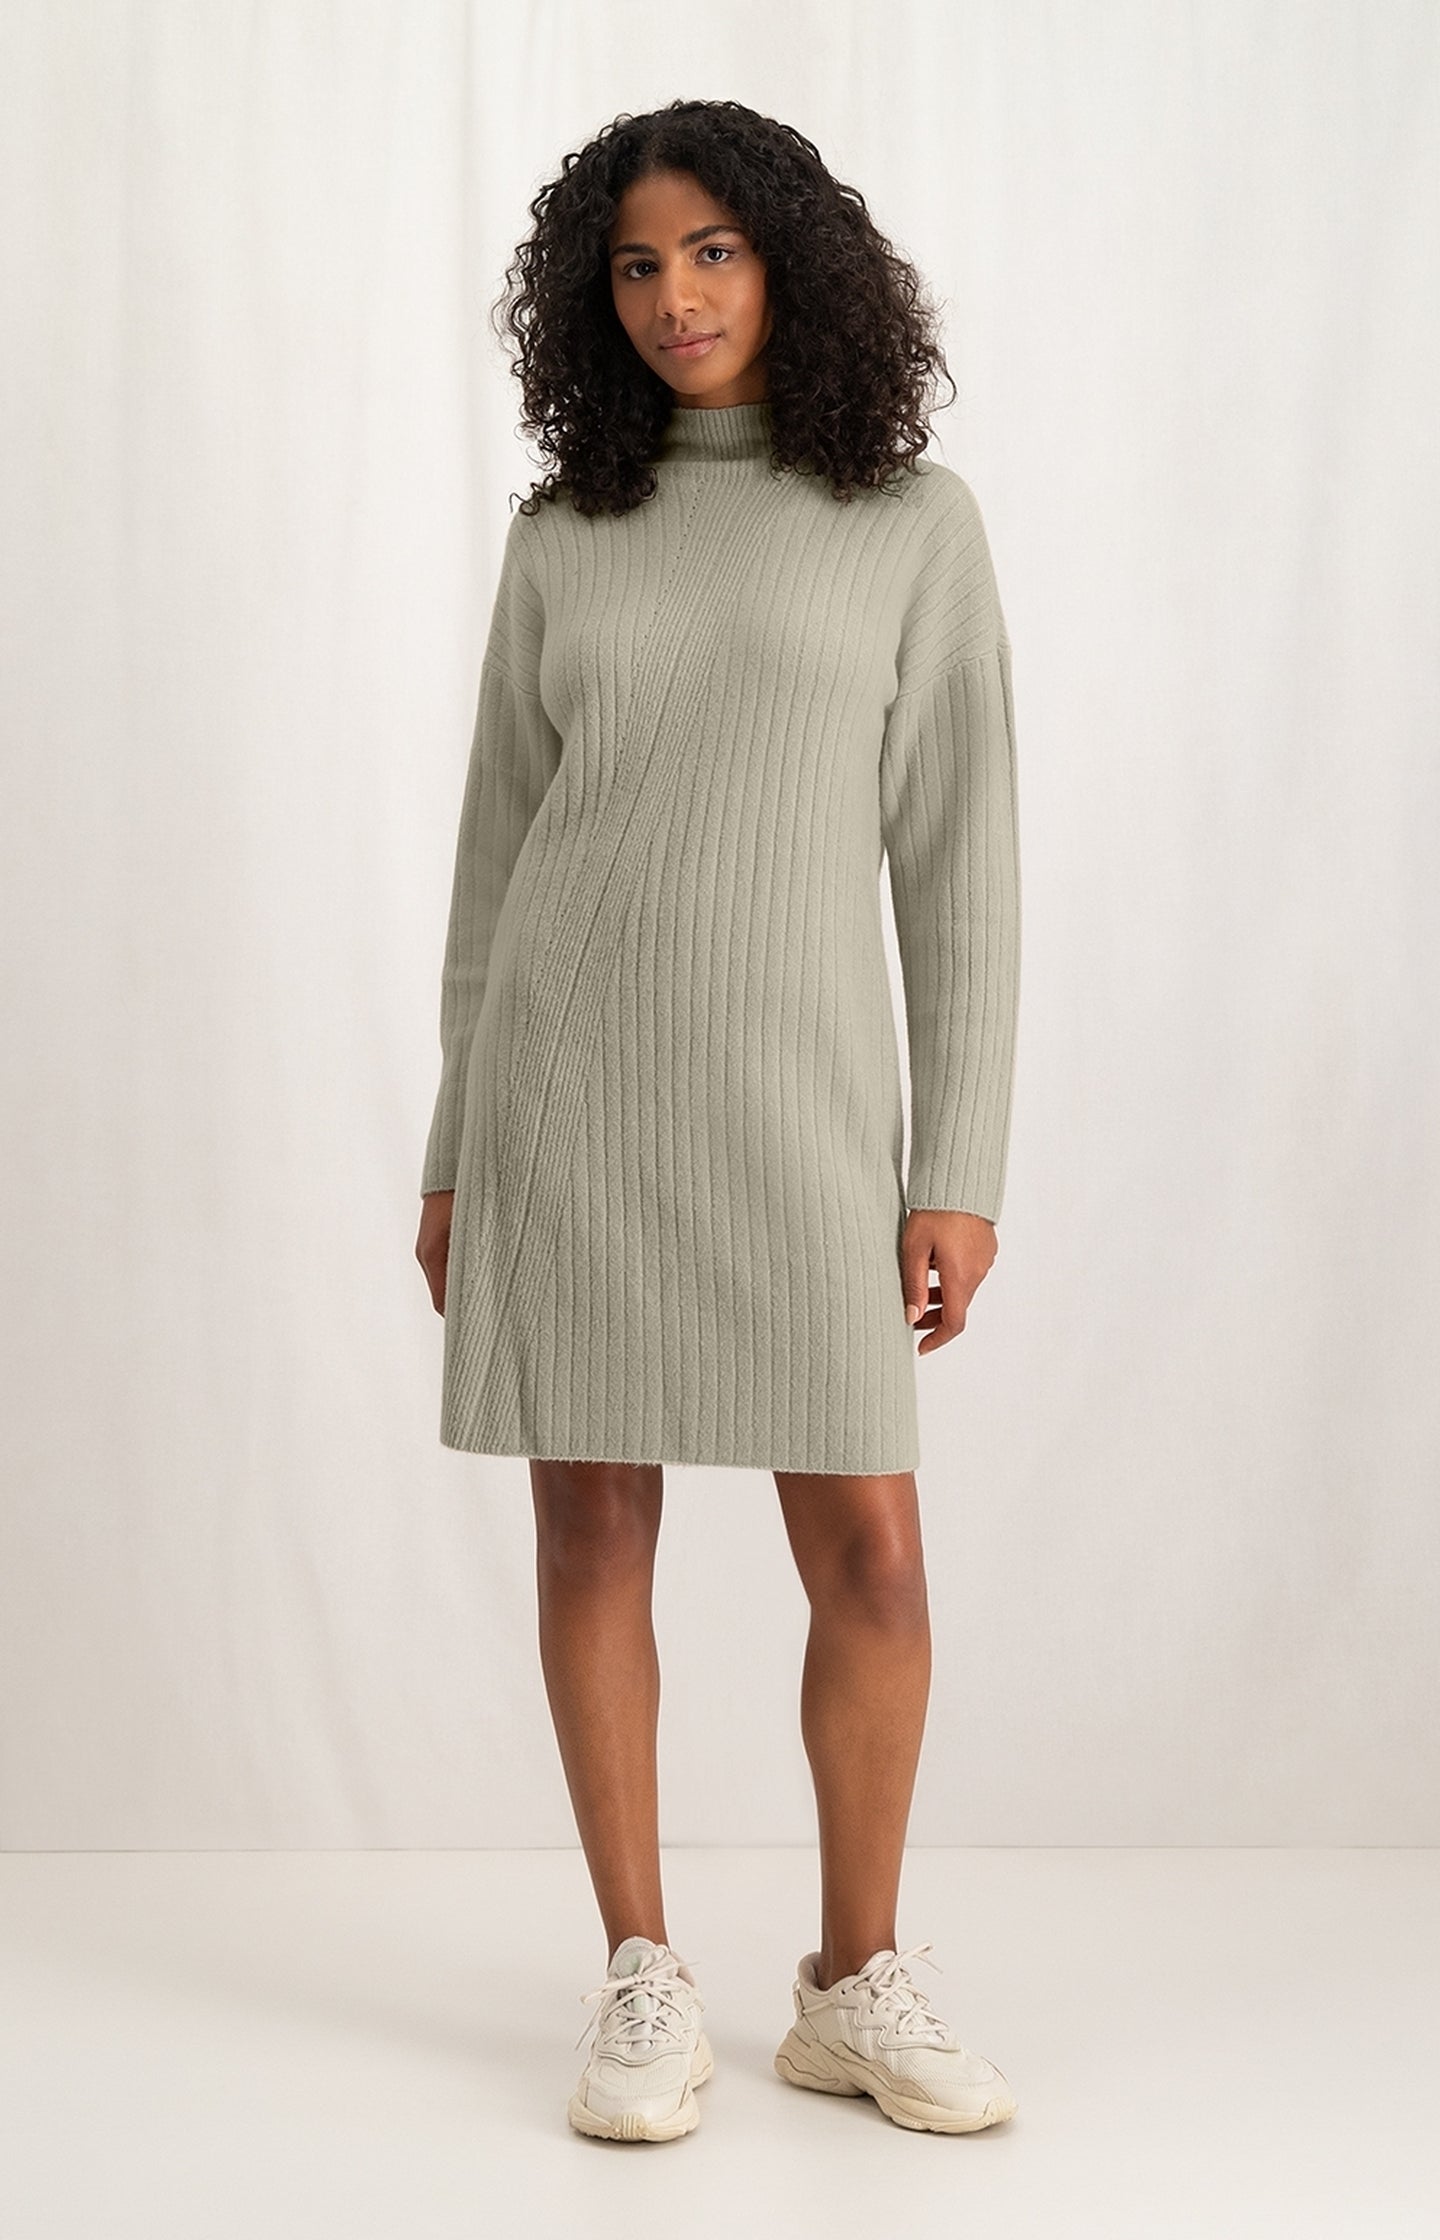 Knitted dress with turtleneck and long sleeves in rib stitch